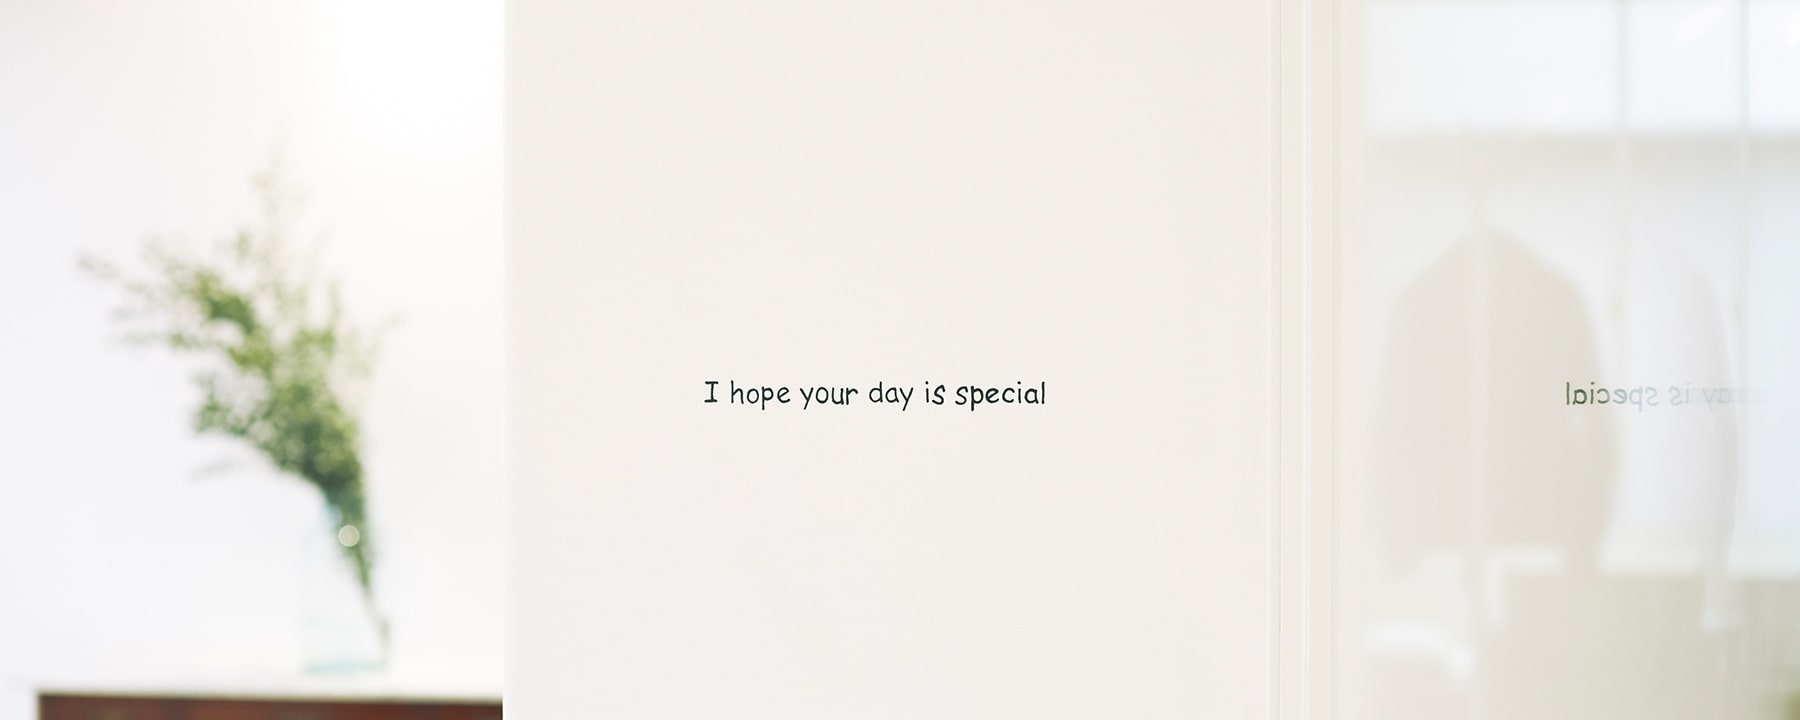 I hope your day is special